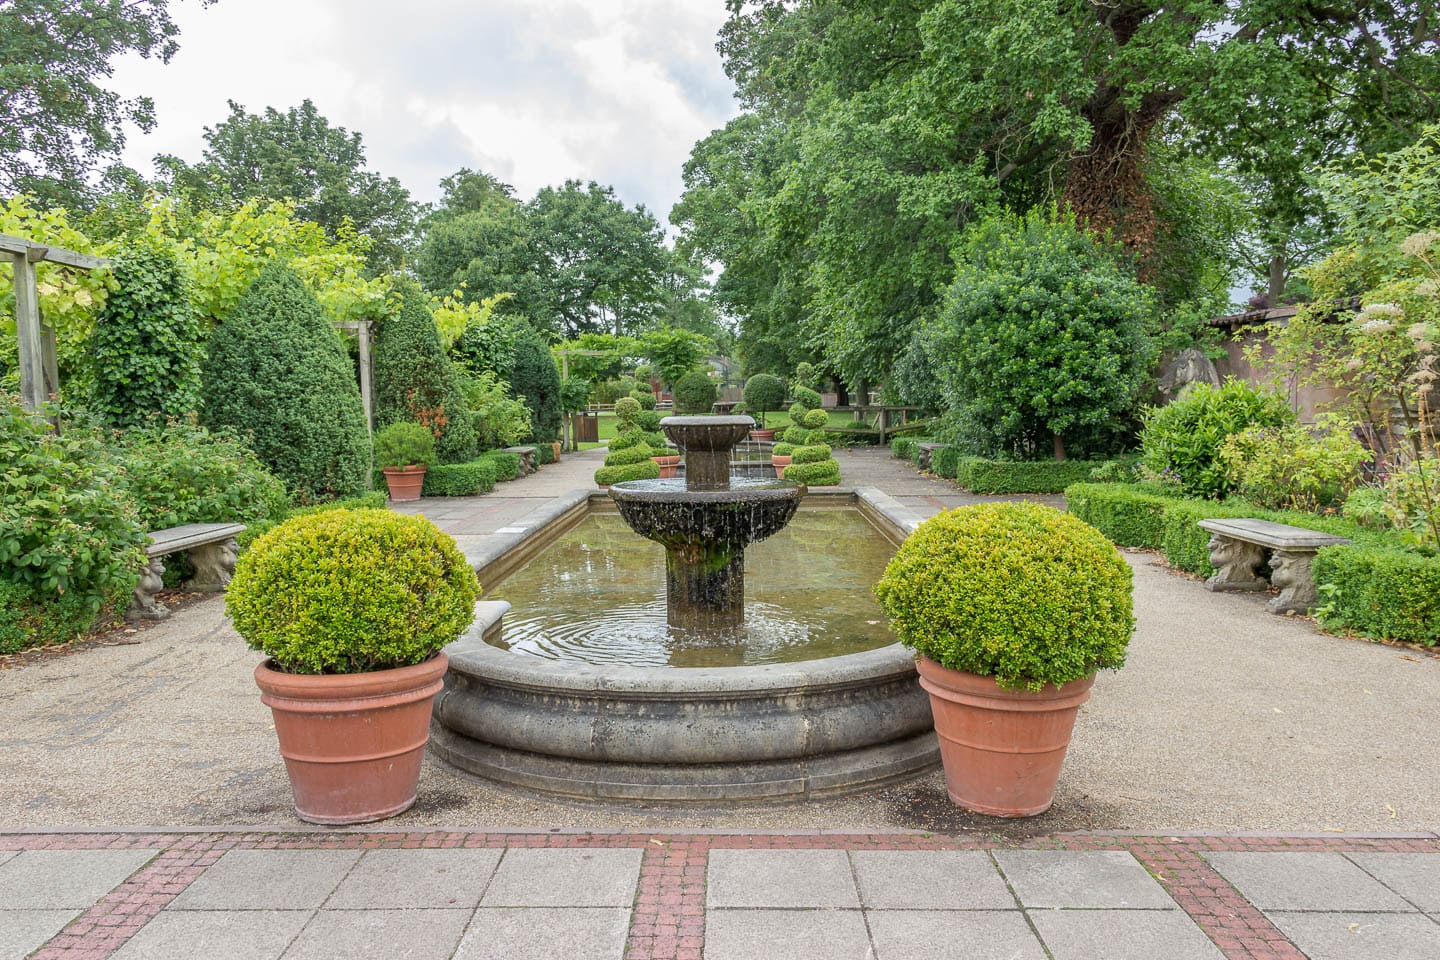 Formal garden with a water feature down the middle